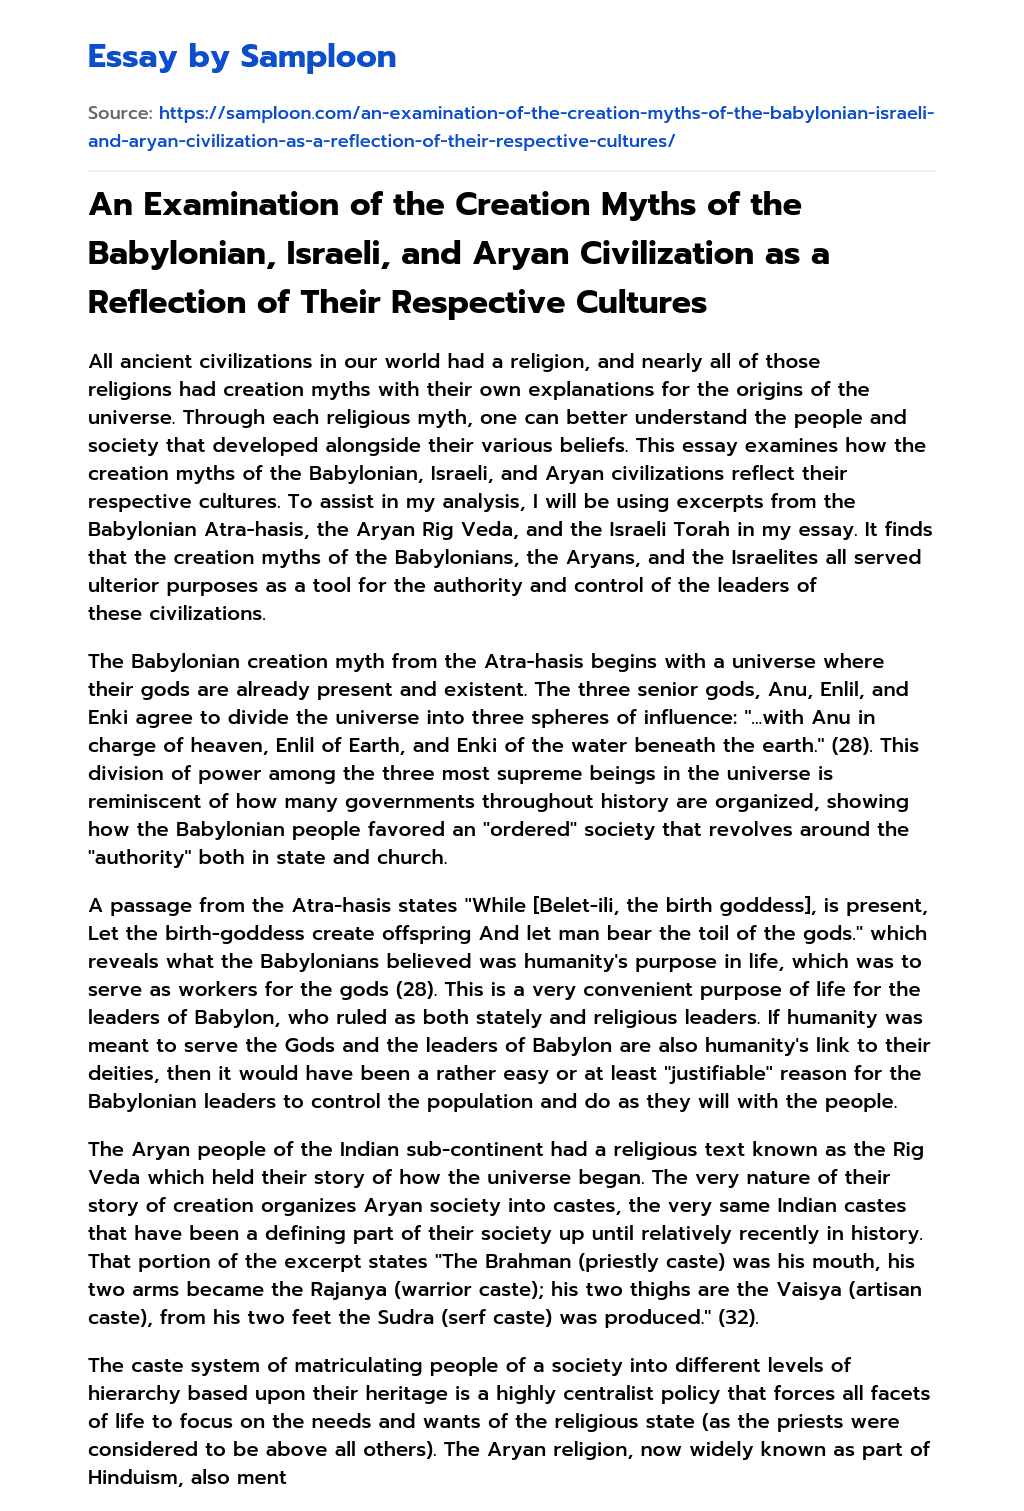 An Examination of the Creation Myths of the Babylonian, Israeli, and Aryan Civilization as a Reflection of Their Respective Cultures essay